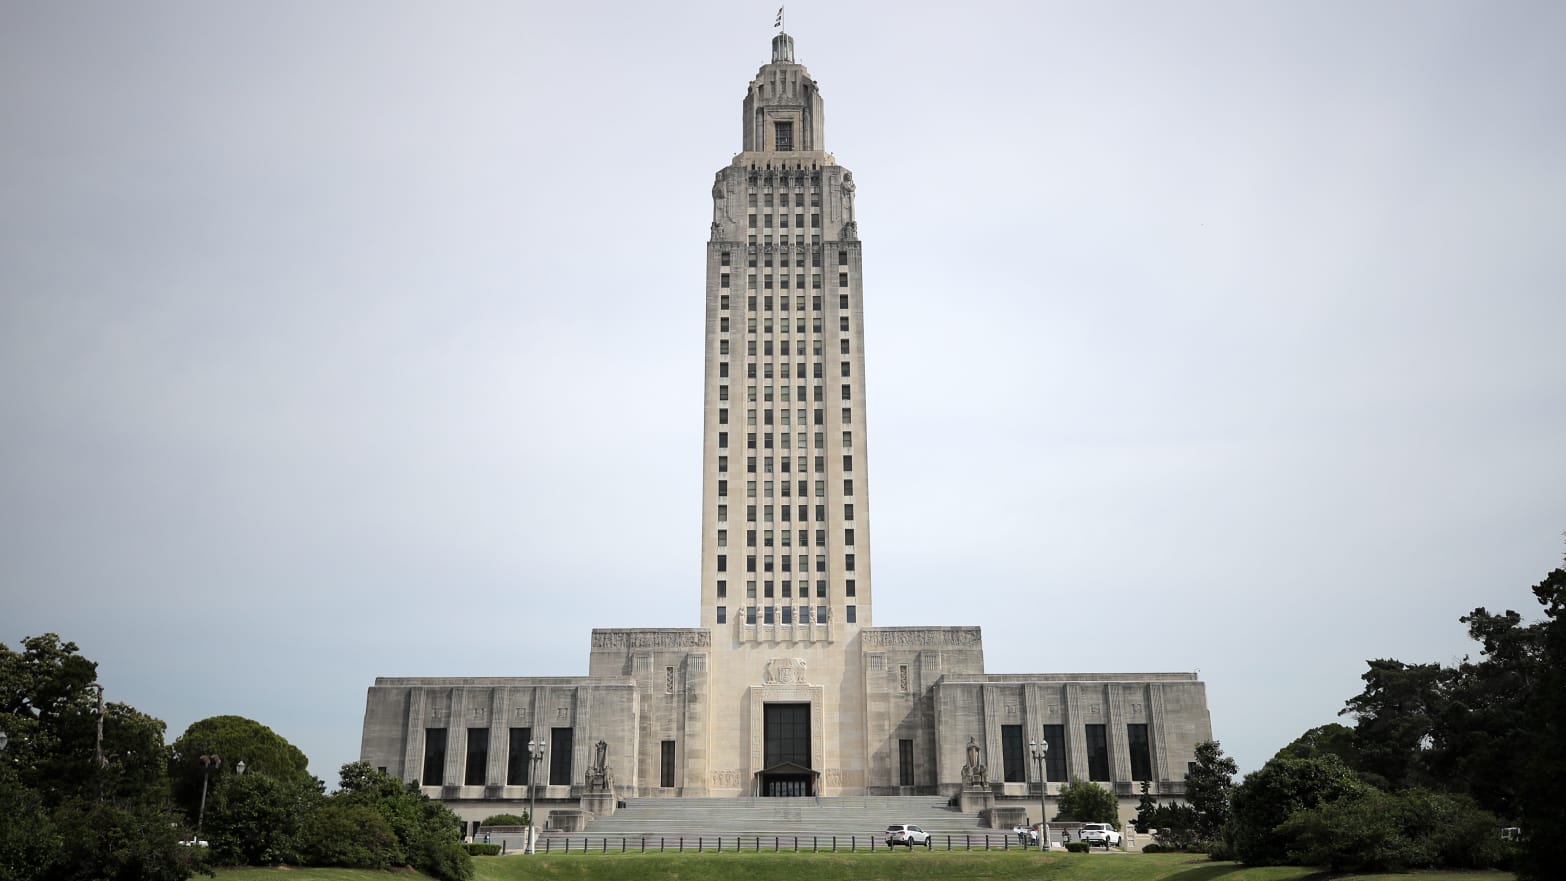 A general view of the Louisiana State Capitol prior to a rally against Louisiana's stay-at-home order and economic shutdown on April 17, 2020 in Baton Rouge, Louisiana. 